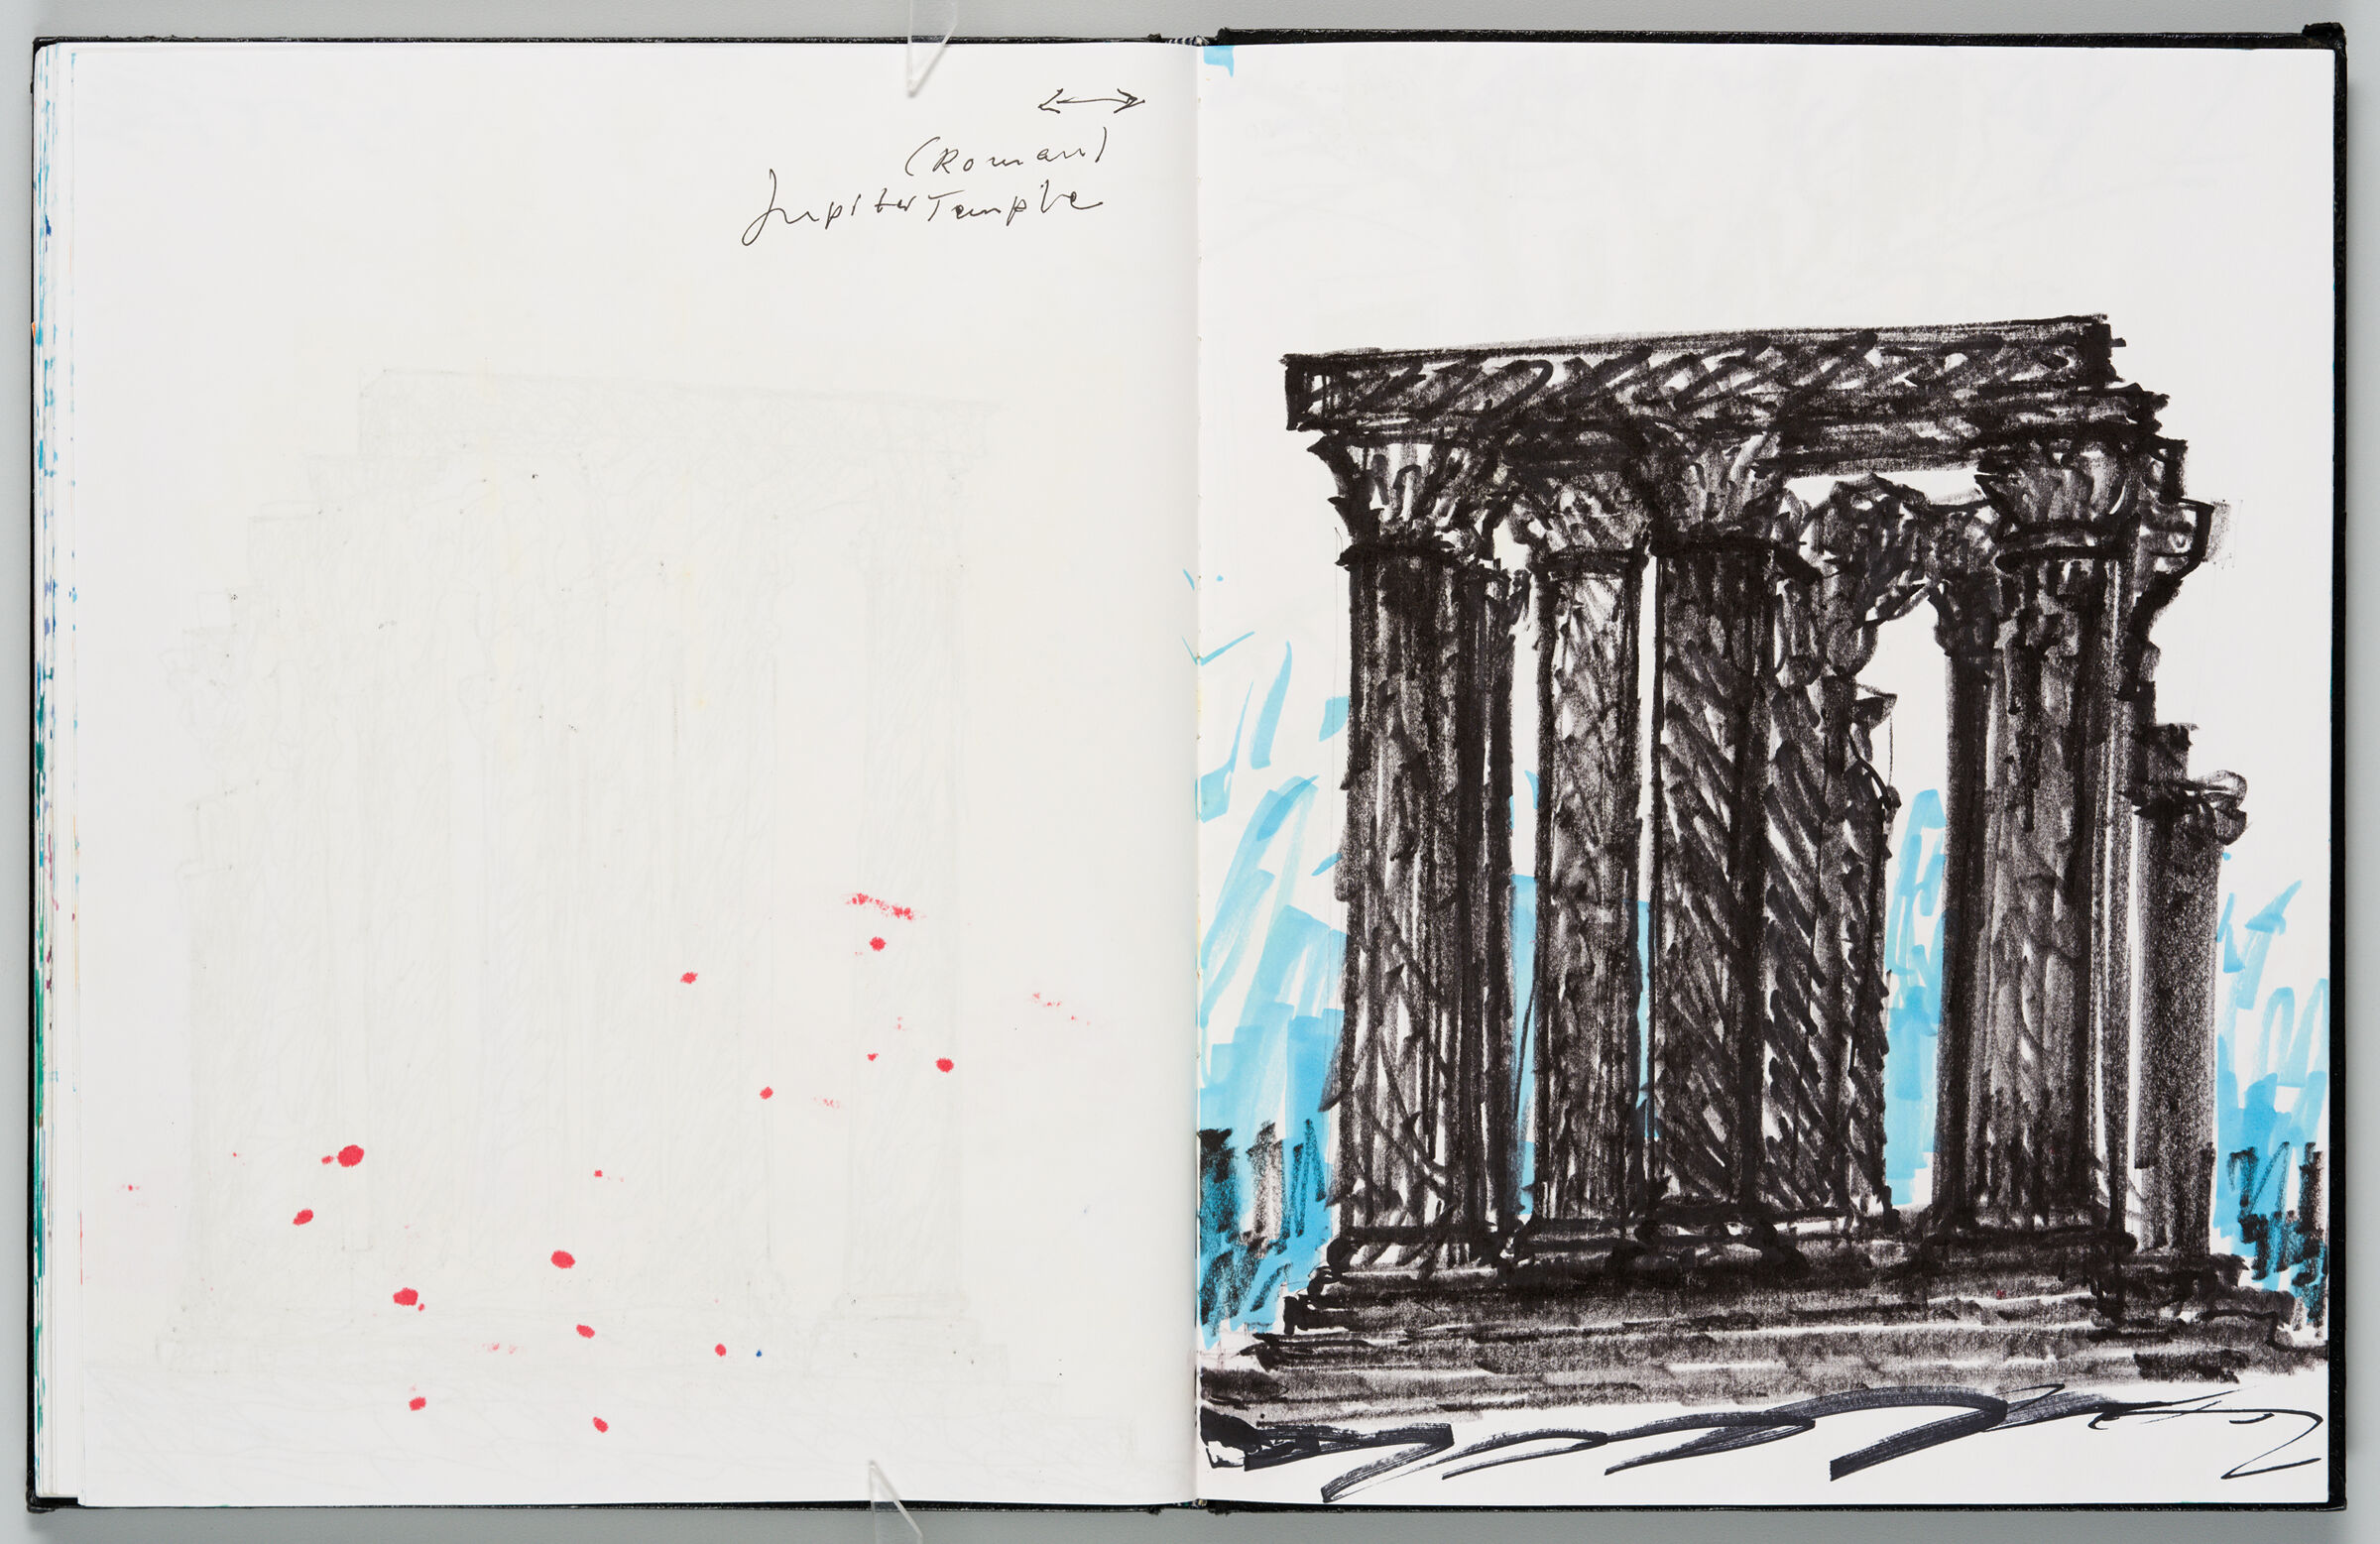 Untitled (Bleed-Through From Previous Page, Left Page); Untitled (Jupiter Temple In Athens, Right Page)